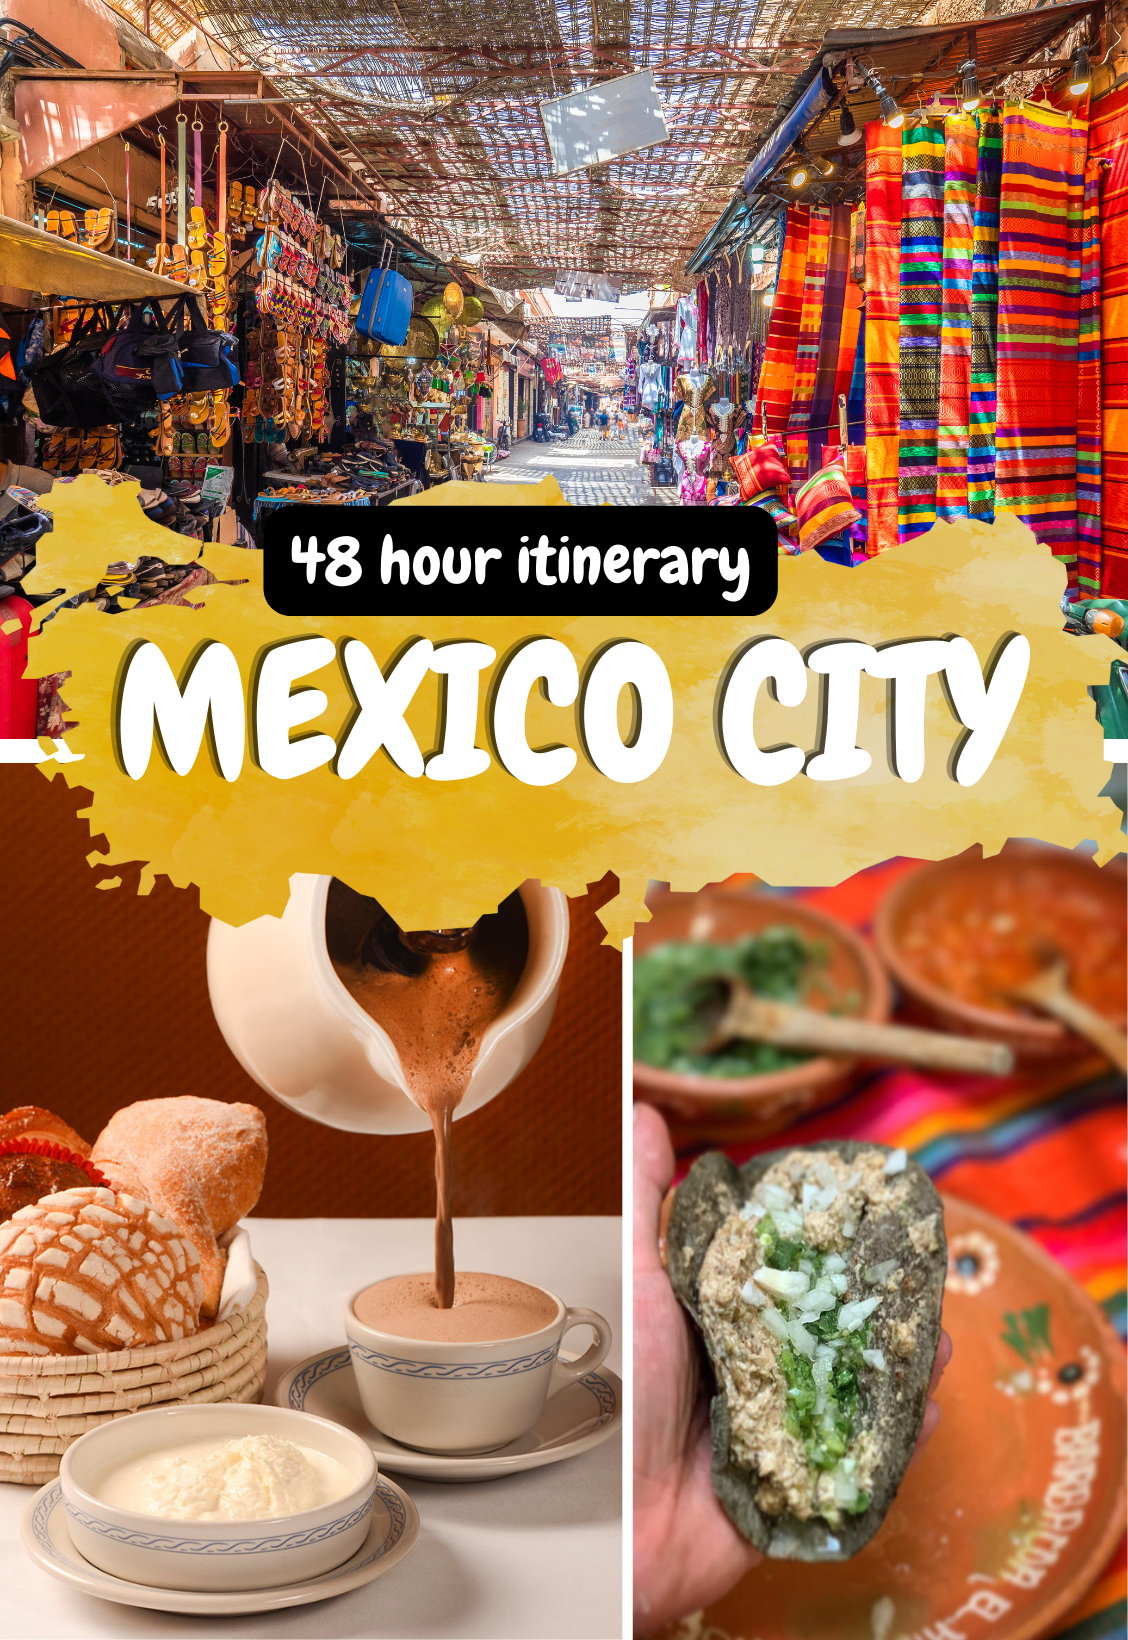 2 Days In Mexico City - a 48 hour itinerary